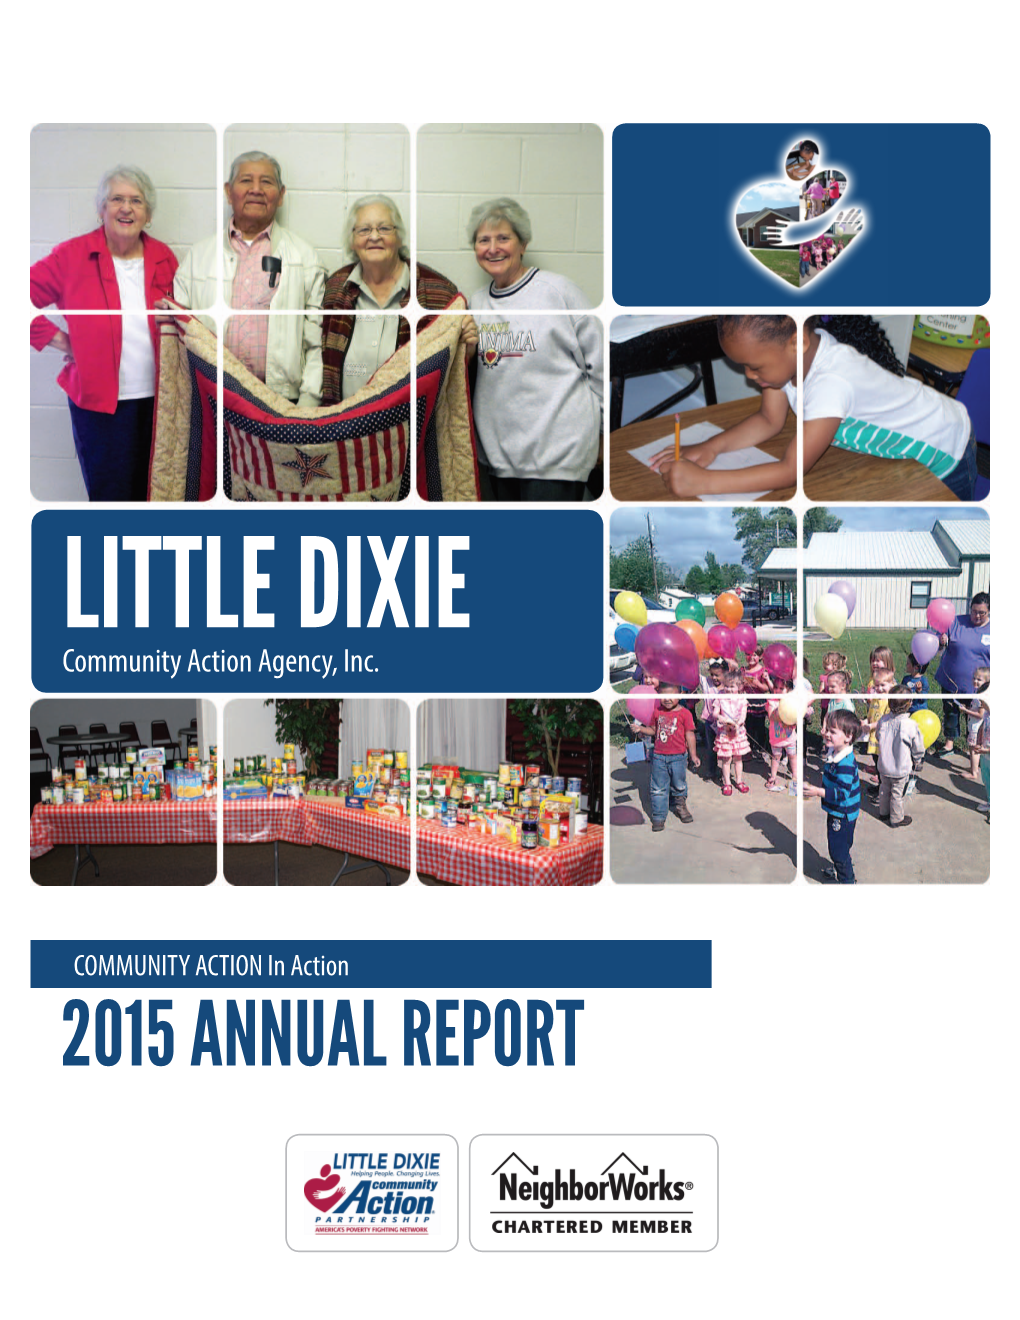 2015 ANNUAL REPORT MISSION: “Helping People; Changing Lives”